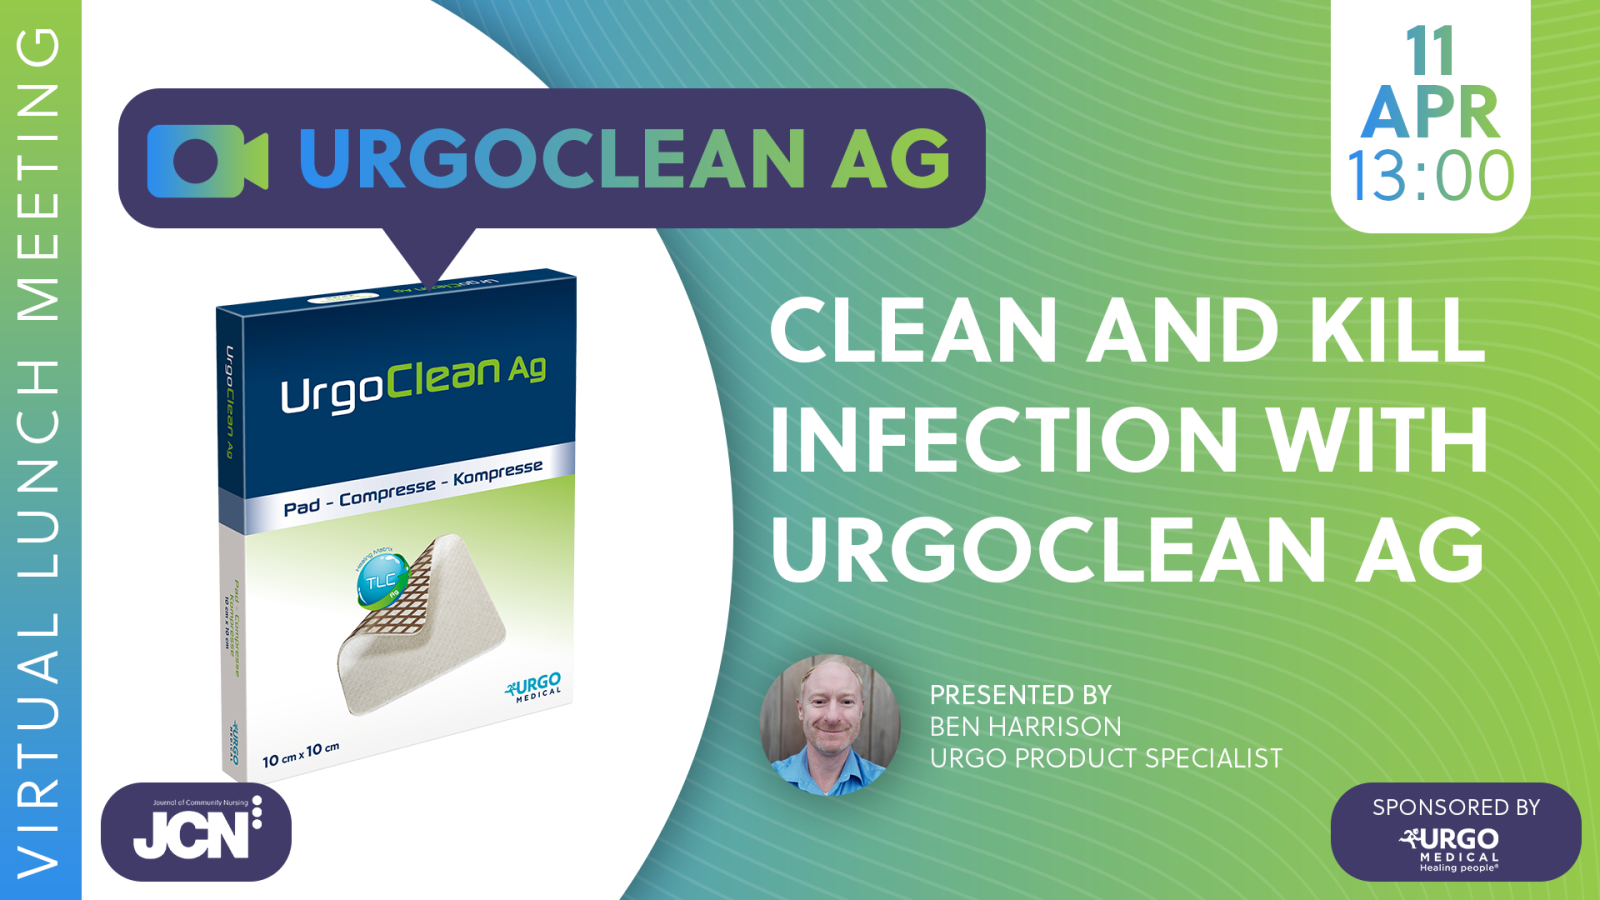 Virtual Lunch Meeting: Clean and kill infection with UrgoClean Ag - Slides